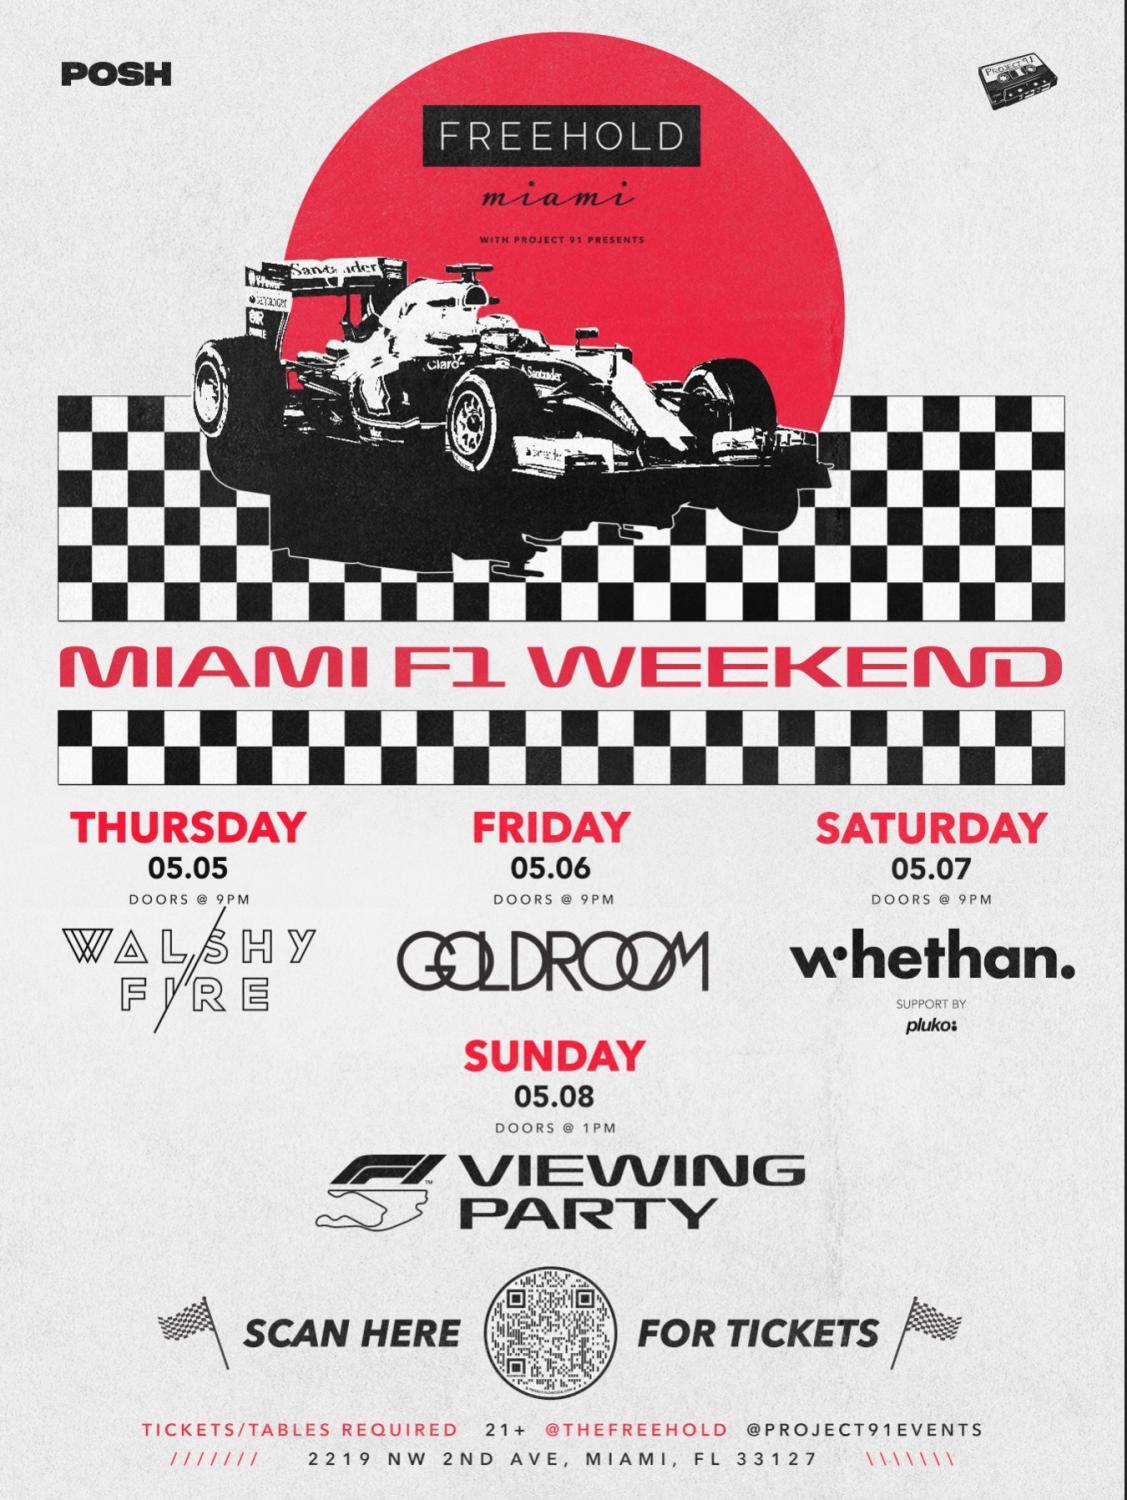 FREEHOLD Miami to Host Thrilling Lineup for F1 Weekend with Walshy Fire of Major